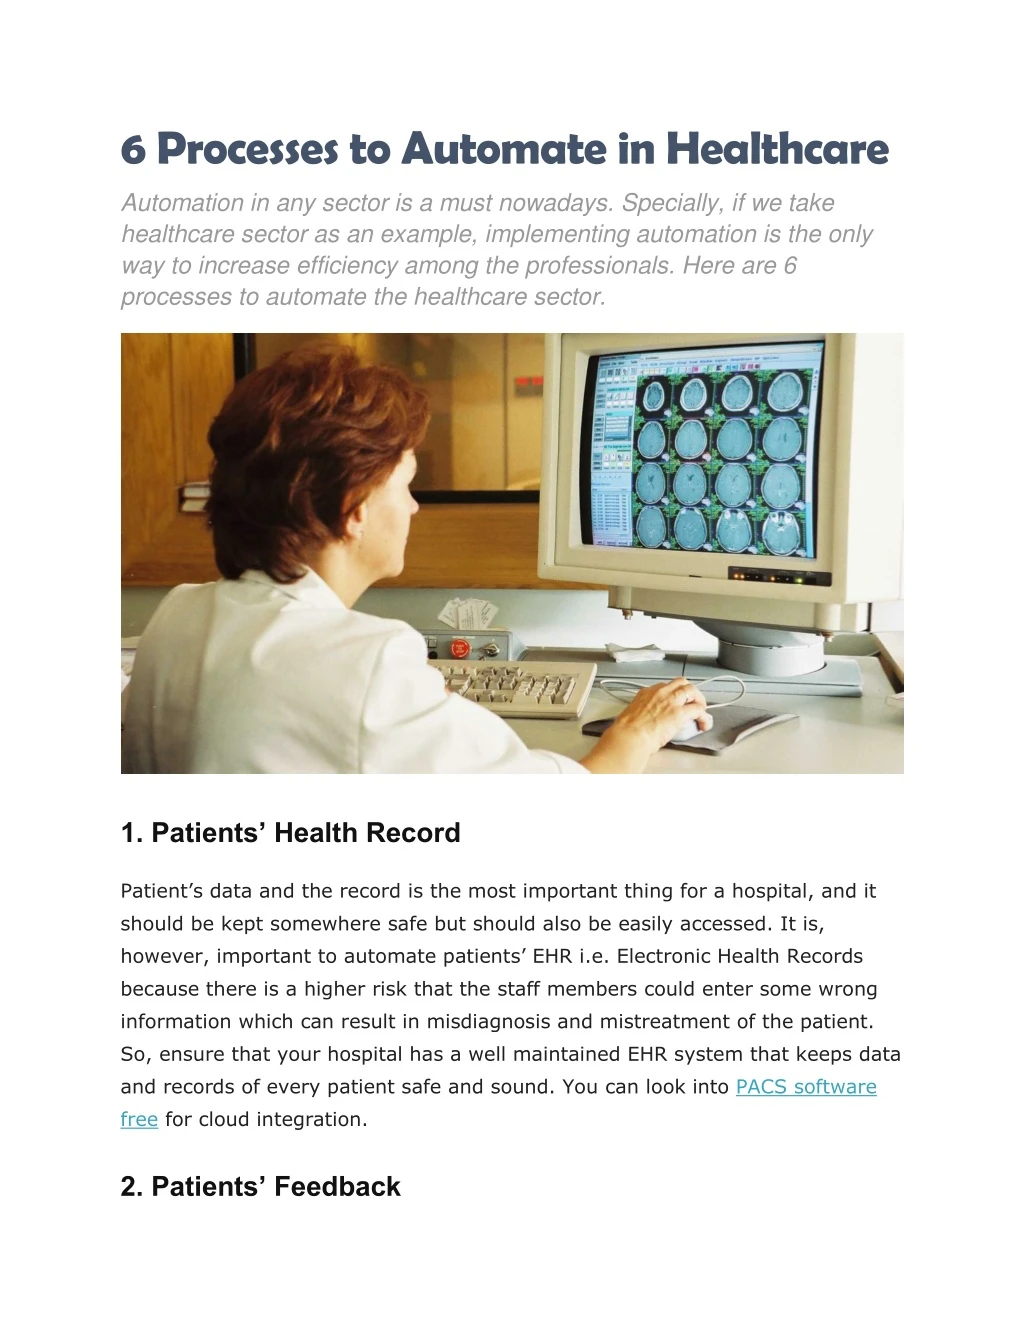 6 processes to automate in healthcare